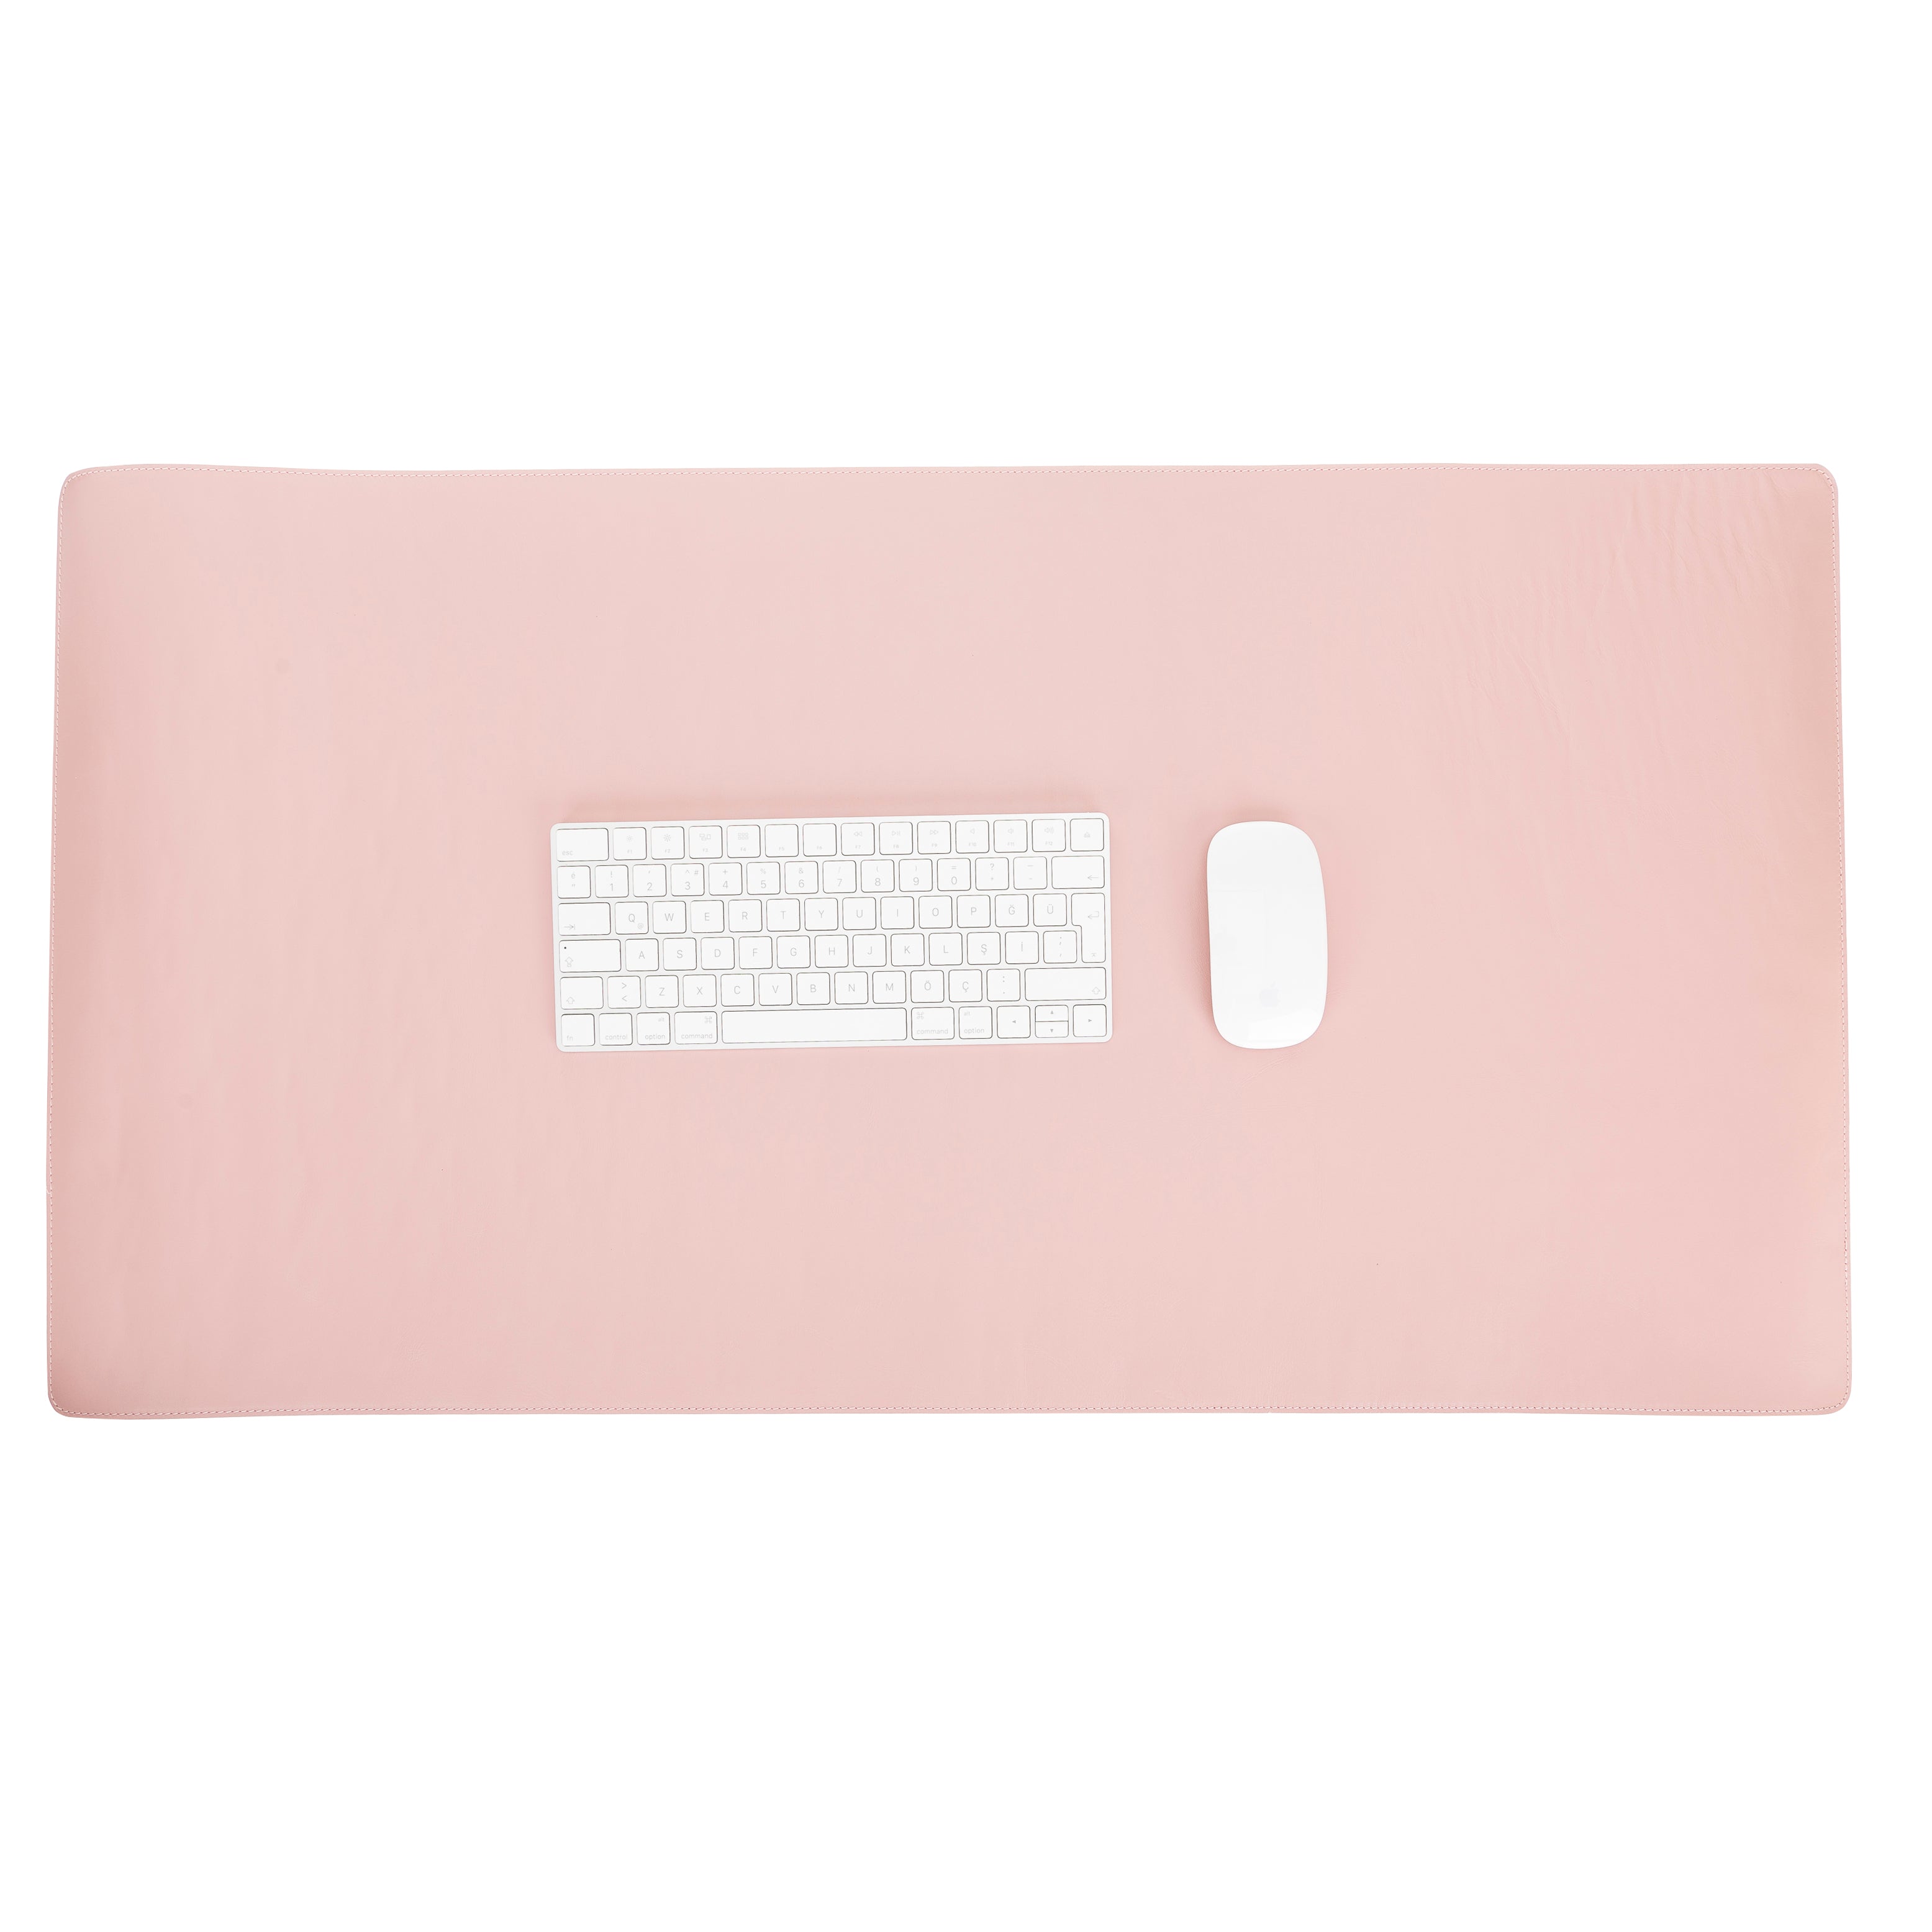 LupinnyLeather Genuine Leather Deskmat, Computer Pad, Office Desk Pad (Pink Nude) 7